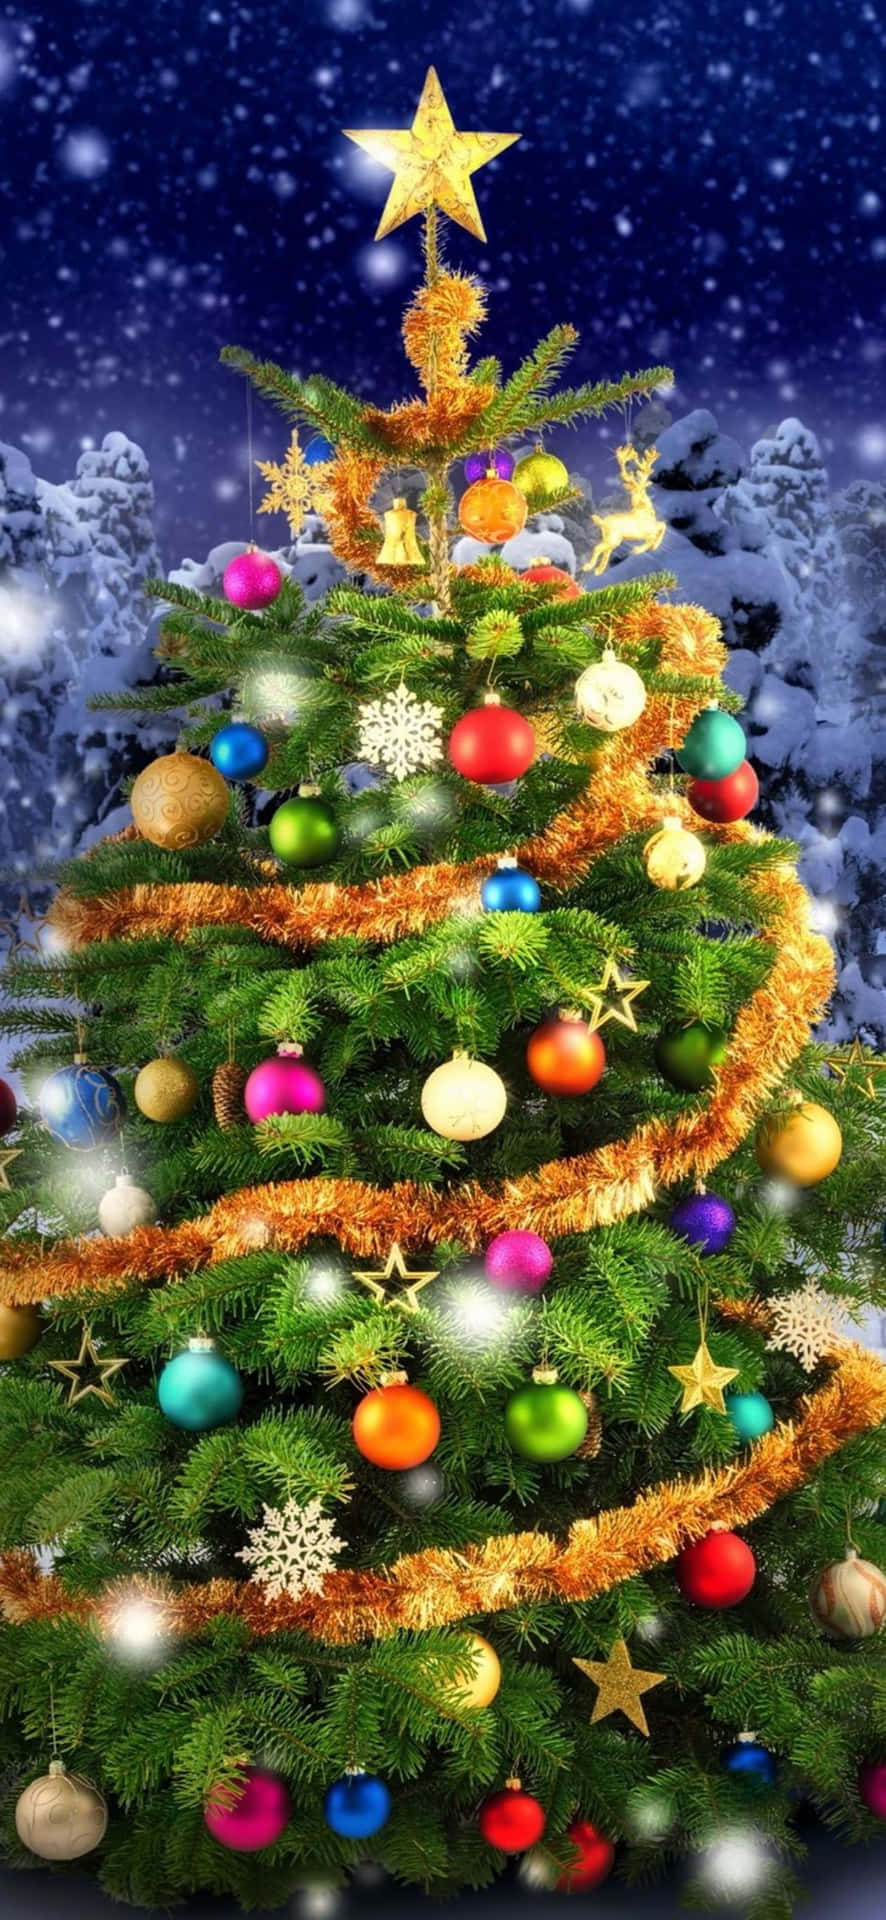 Express the cheer of the holiday season with this beautiful Christmas themed iPhone background